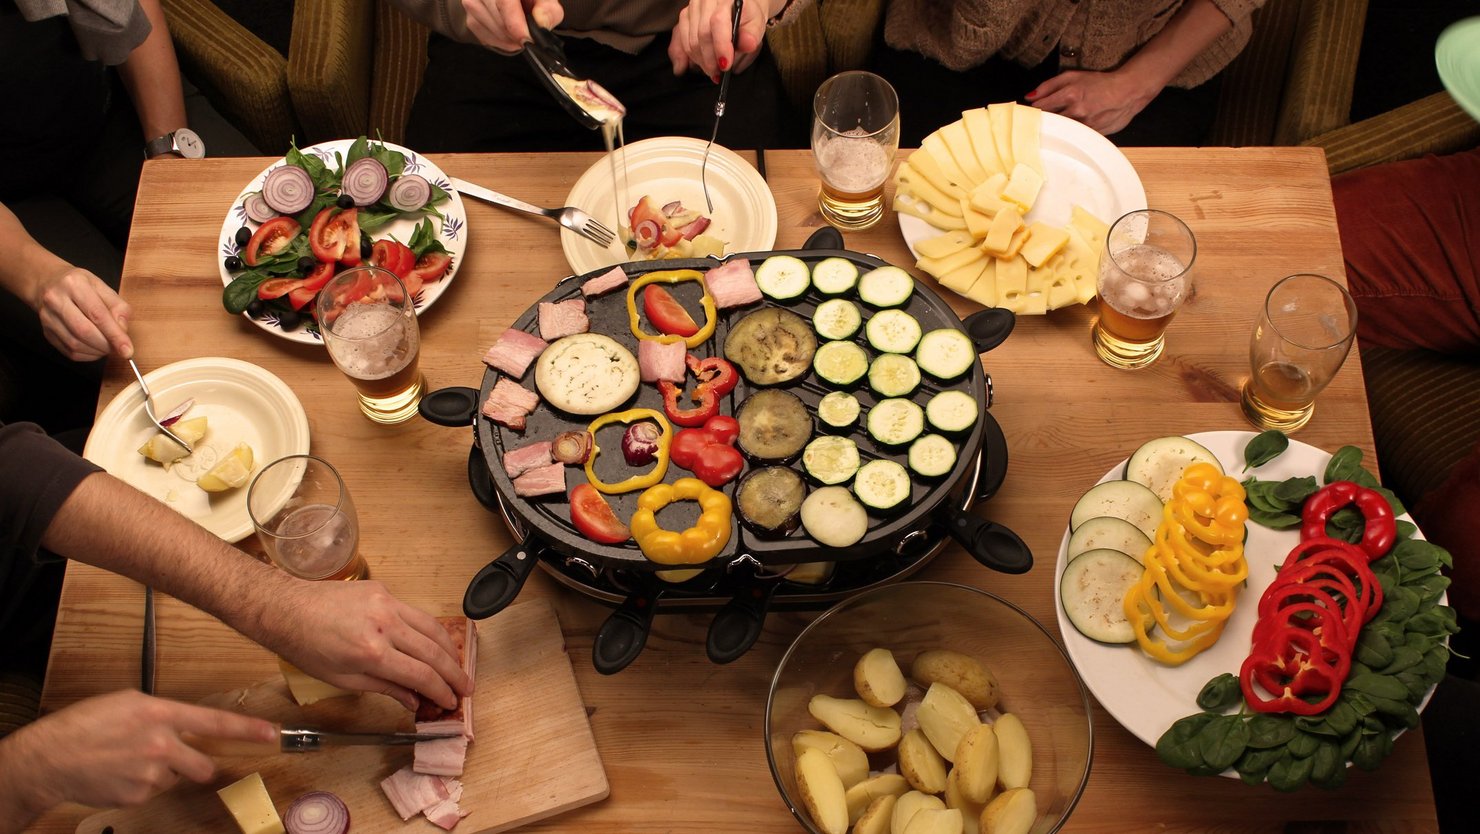 [Translate to SE (Sweden):] Table with raclette oven and dishes with potatoes, vegetables and cheese